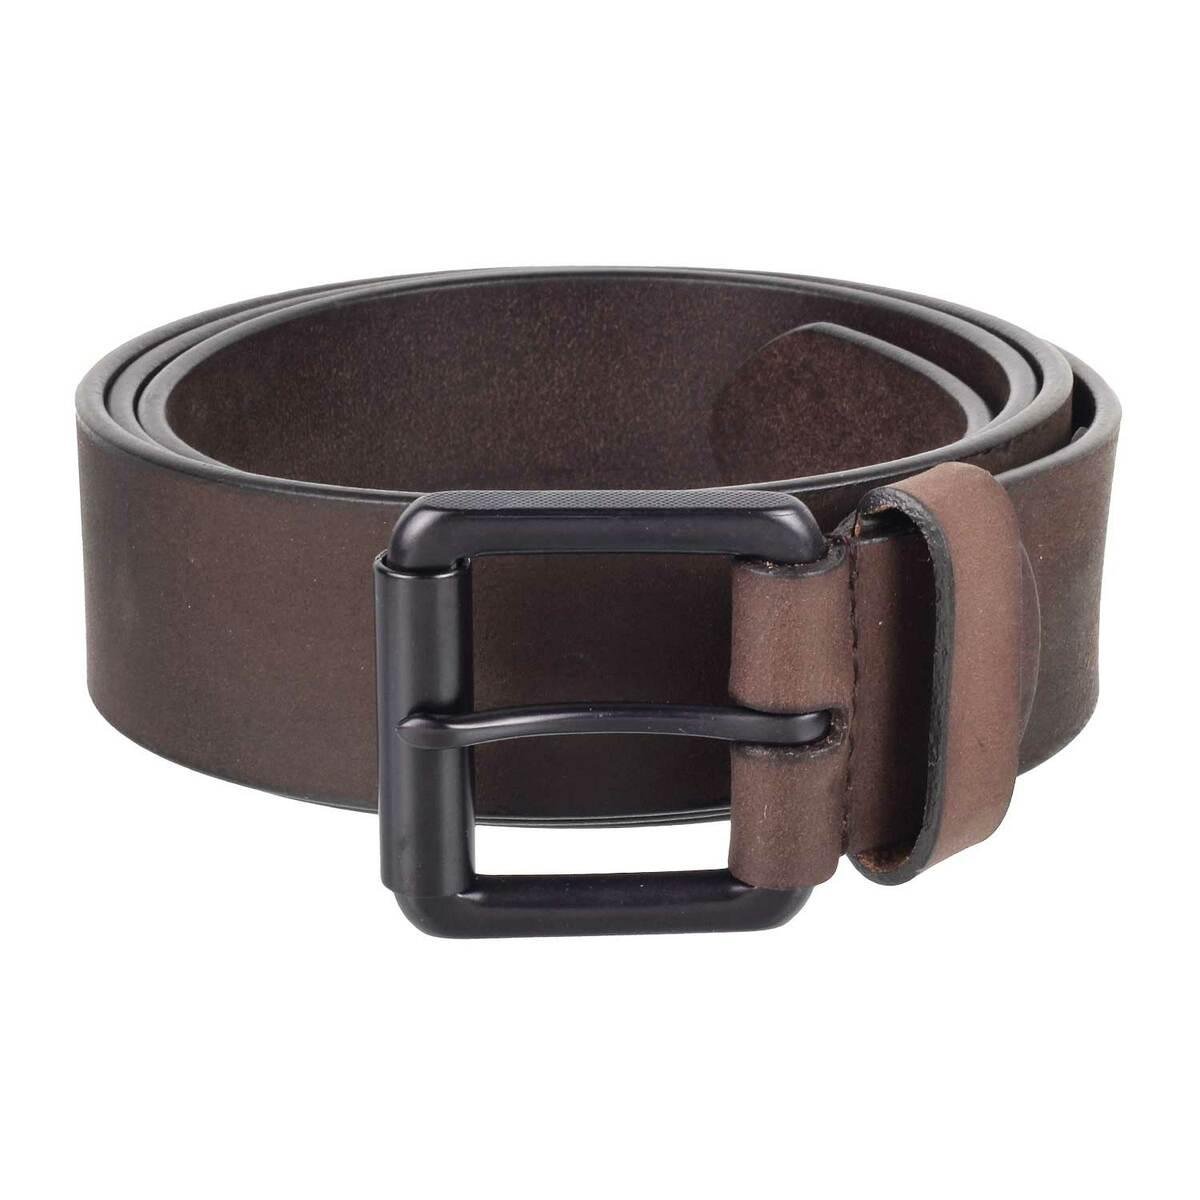 Buy the Best Leather Belts for Women Online from Mochi Shoes